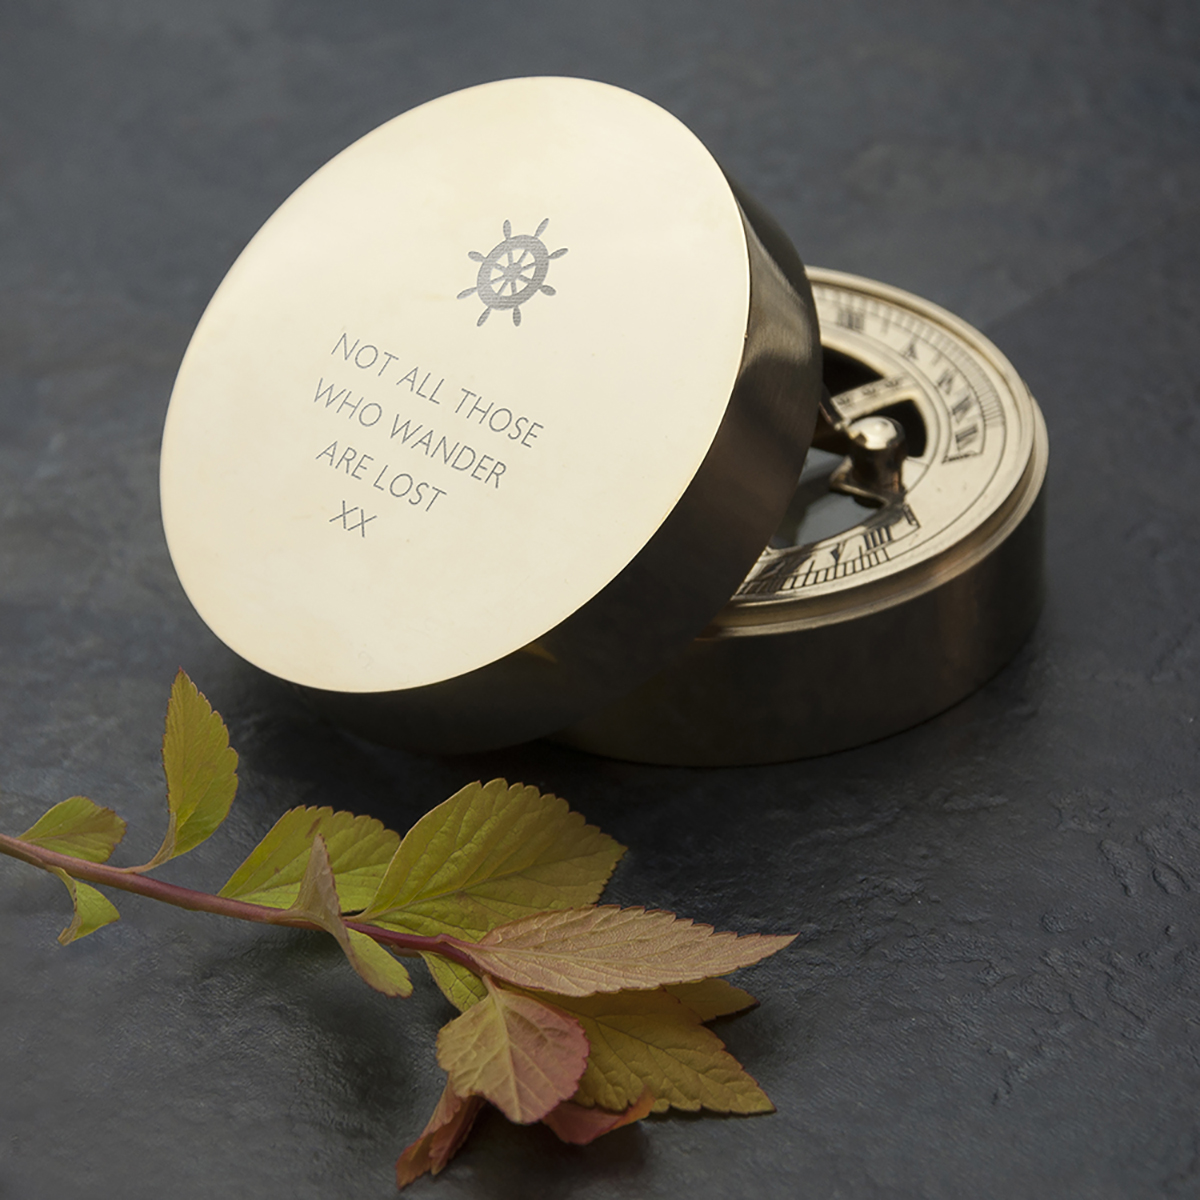 Personalised Iconic Adventurer's Sundial Compass - Message